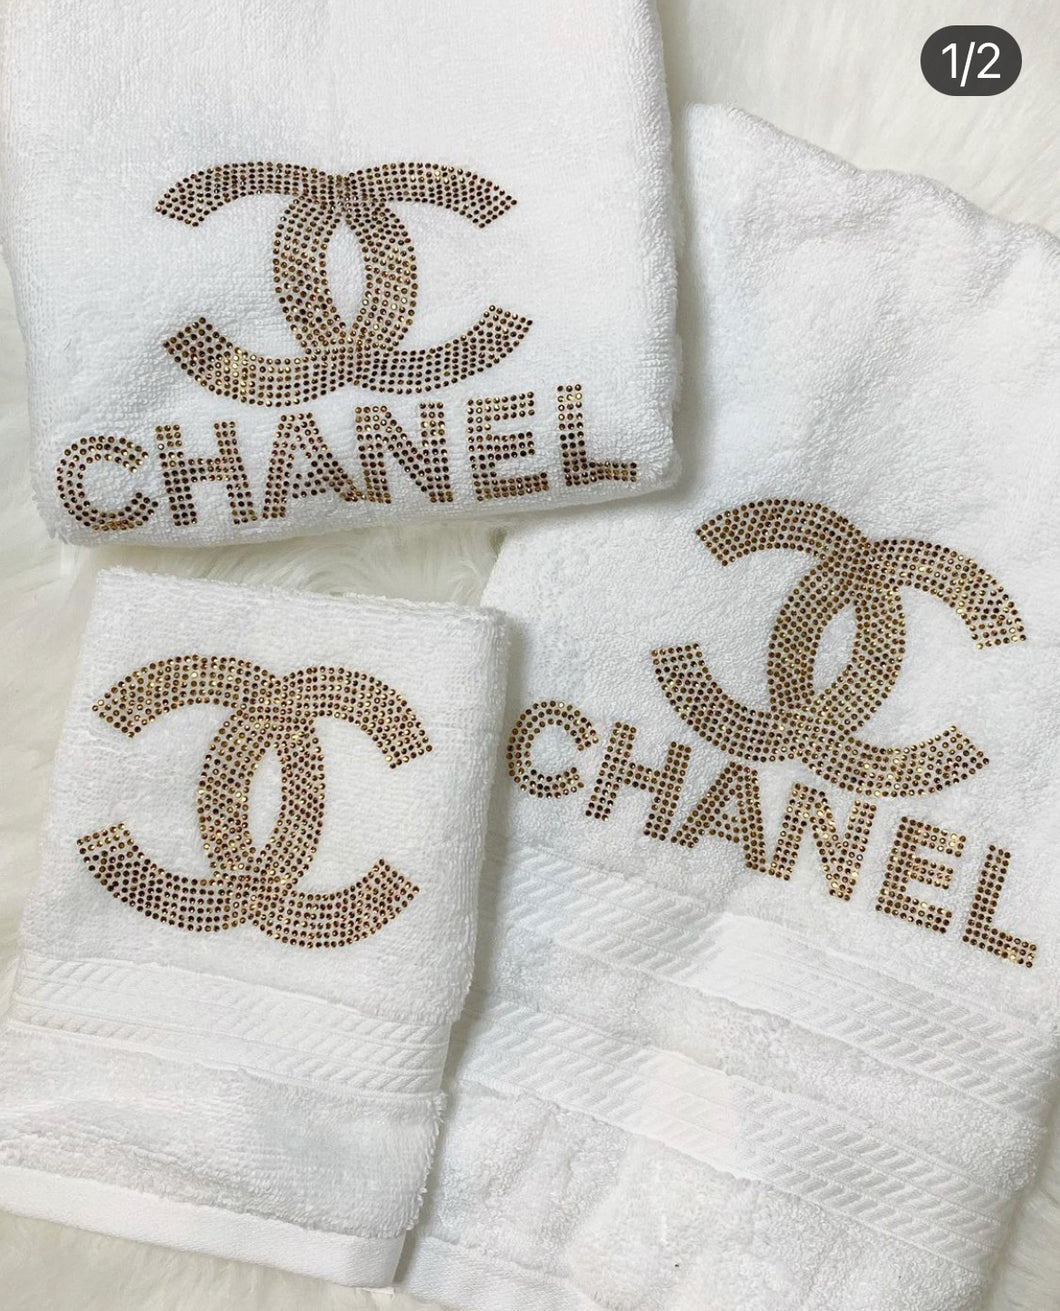 Rhinestone gold chanel logo/White color hands towels 2 size 16in x